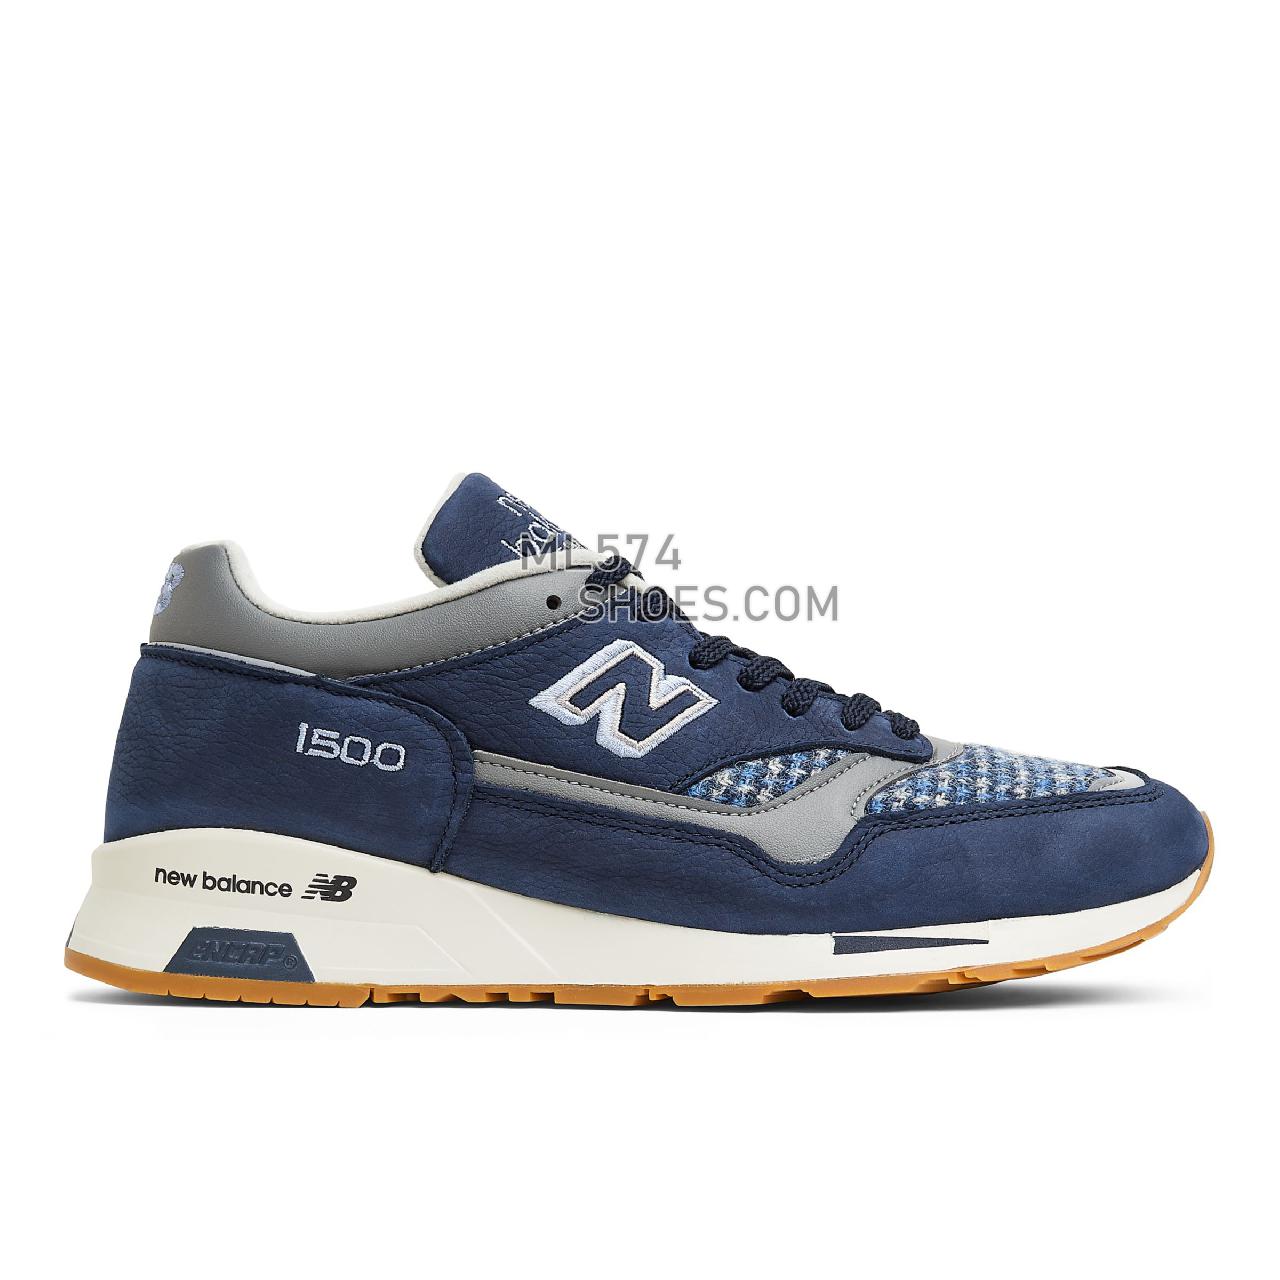 New Balance Made in UK 1500 - Men's Made in USA And UK Sneakers - Navy with Grey - M1500HT